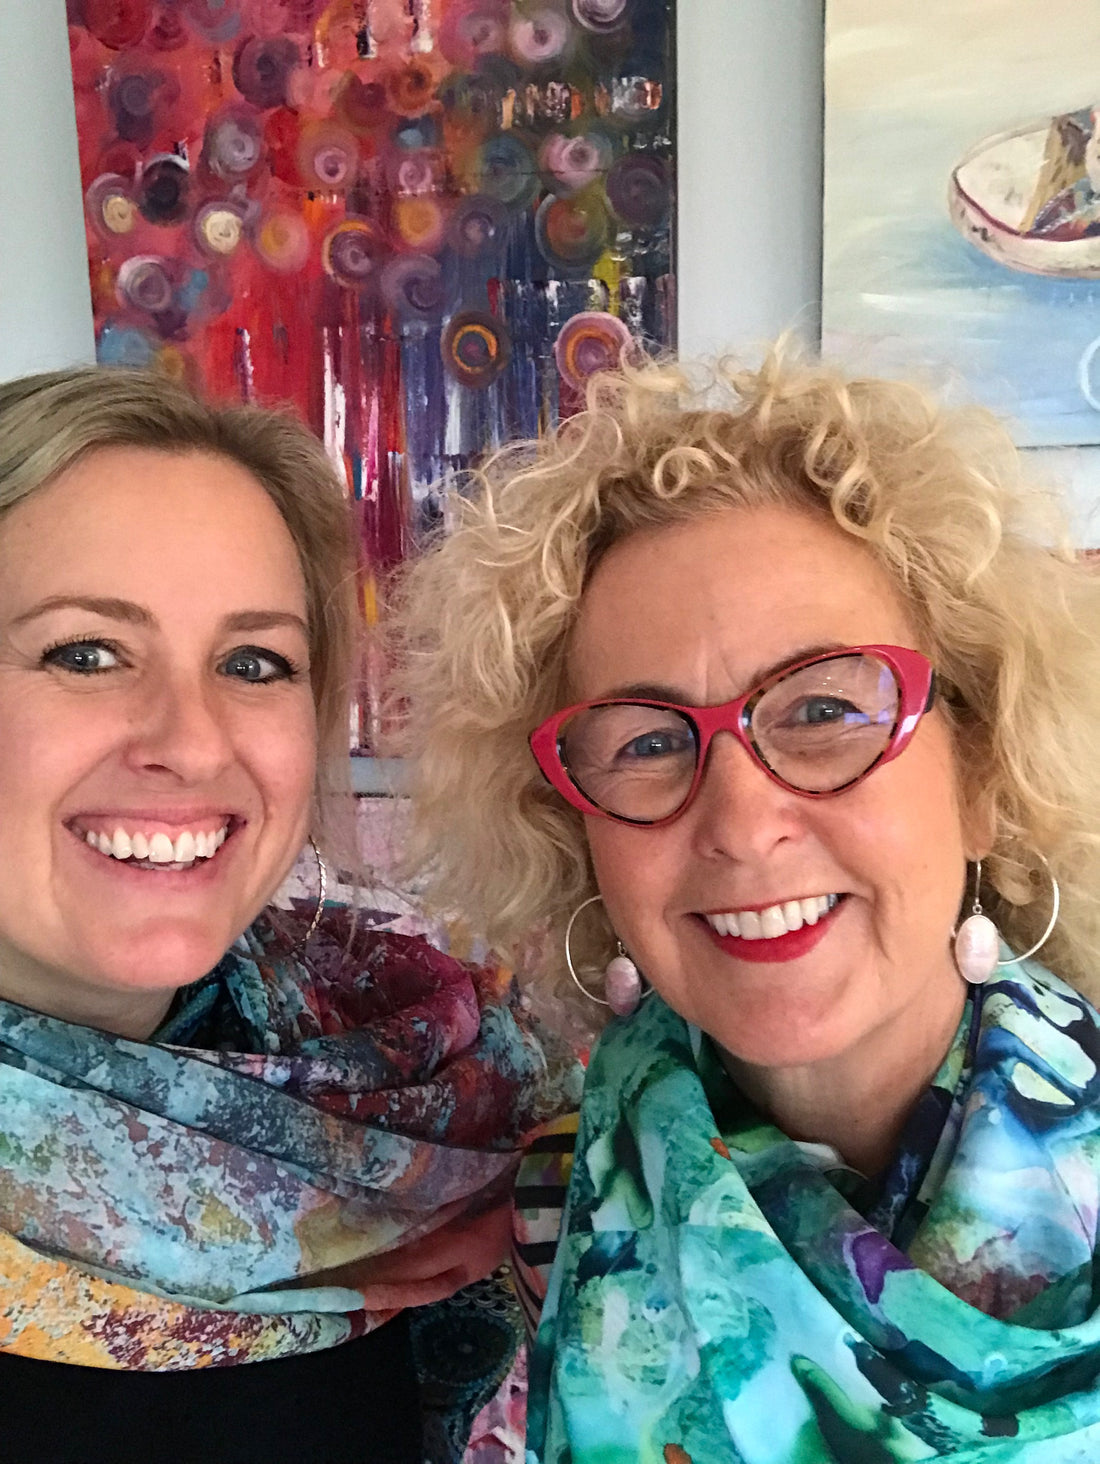 Reni Fee and Wendy Fee, co-owners of Artist Generations, standing in their Artist Generations art studio in Valois Village, Pointe-Claire.